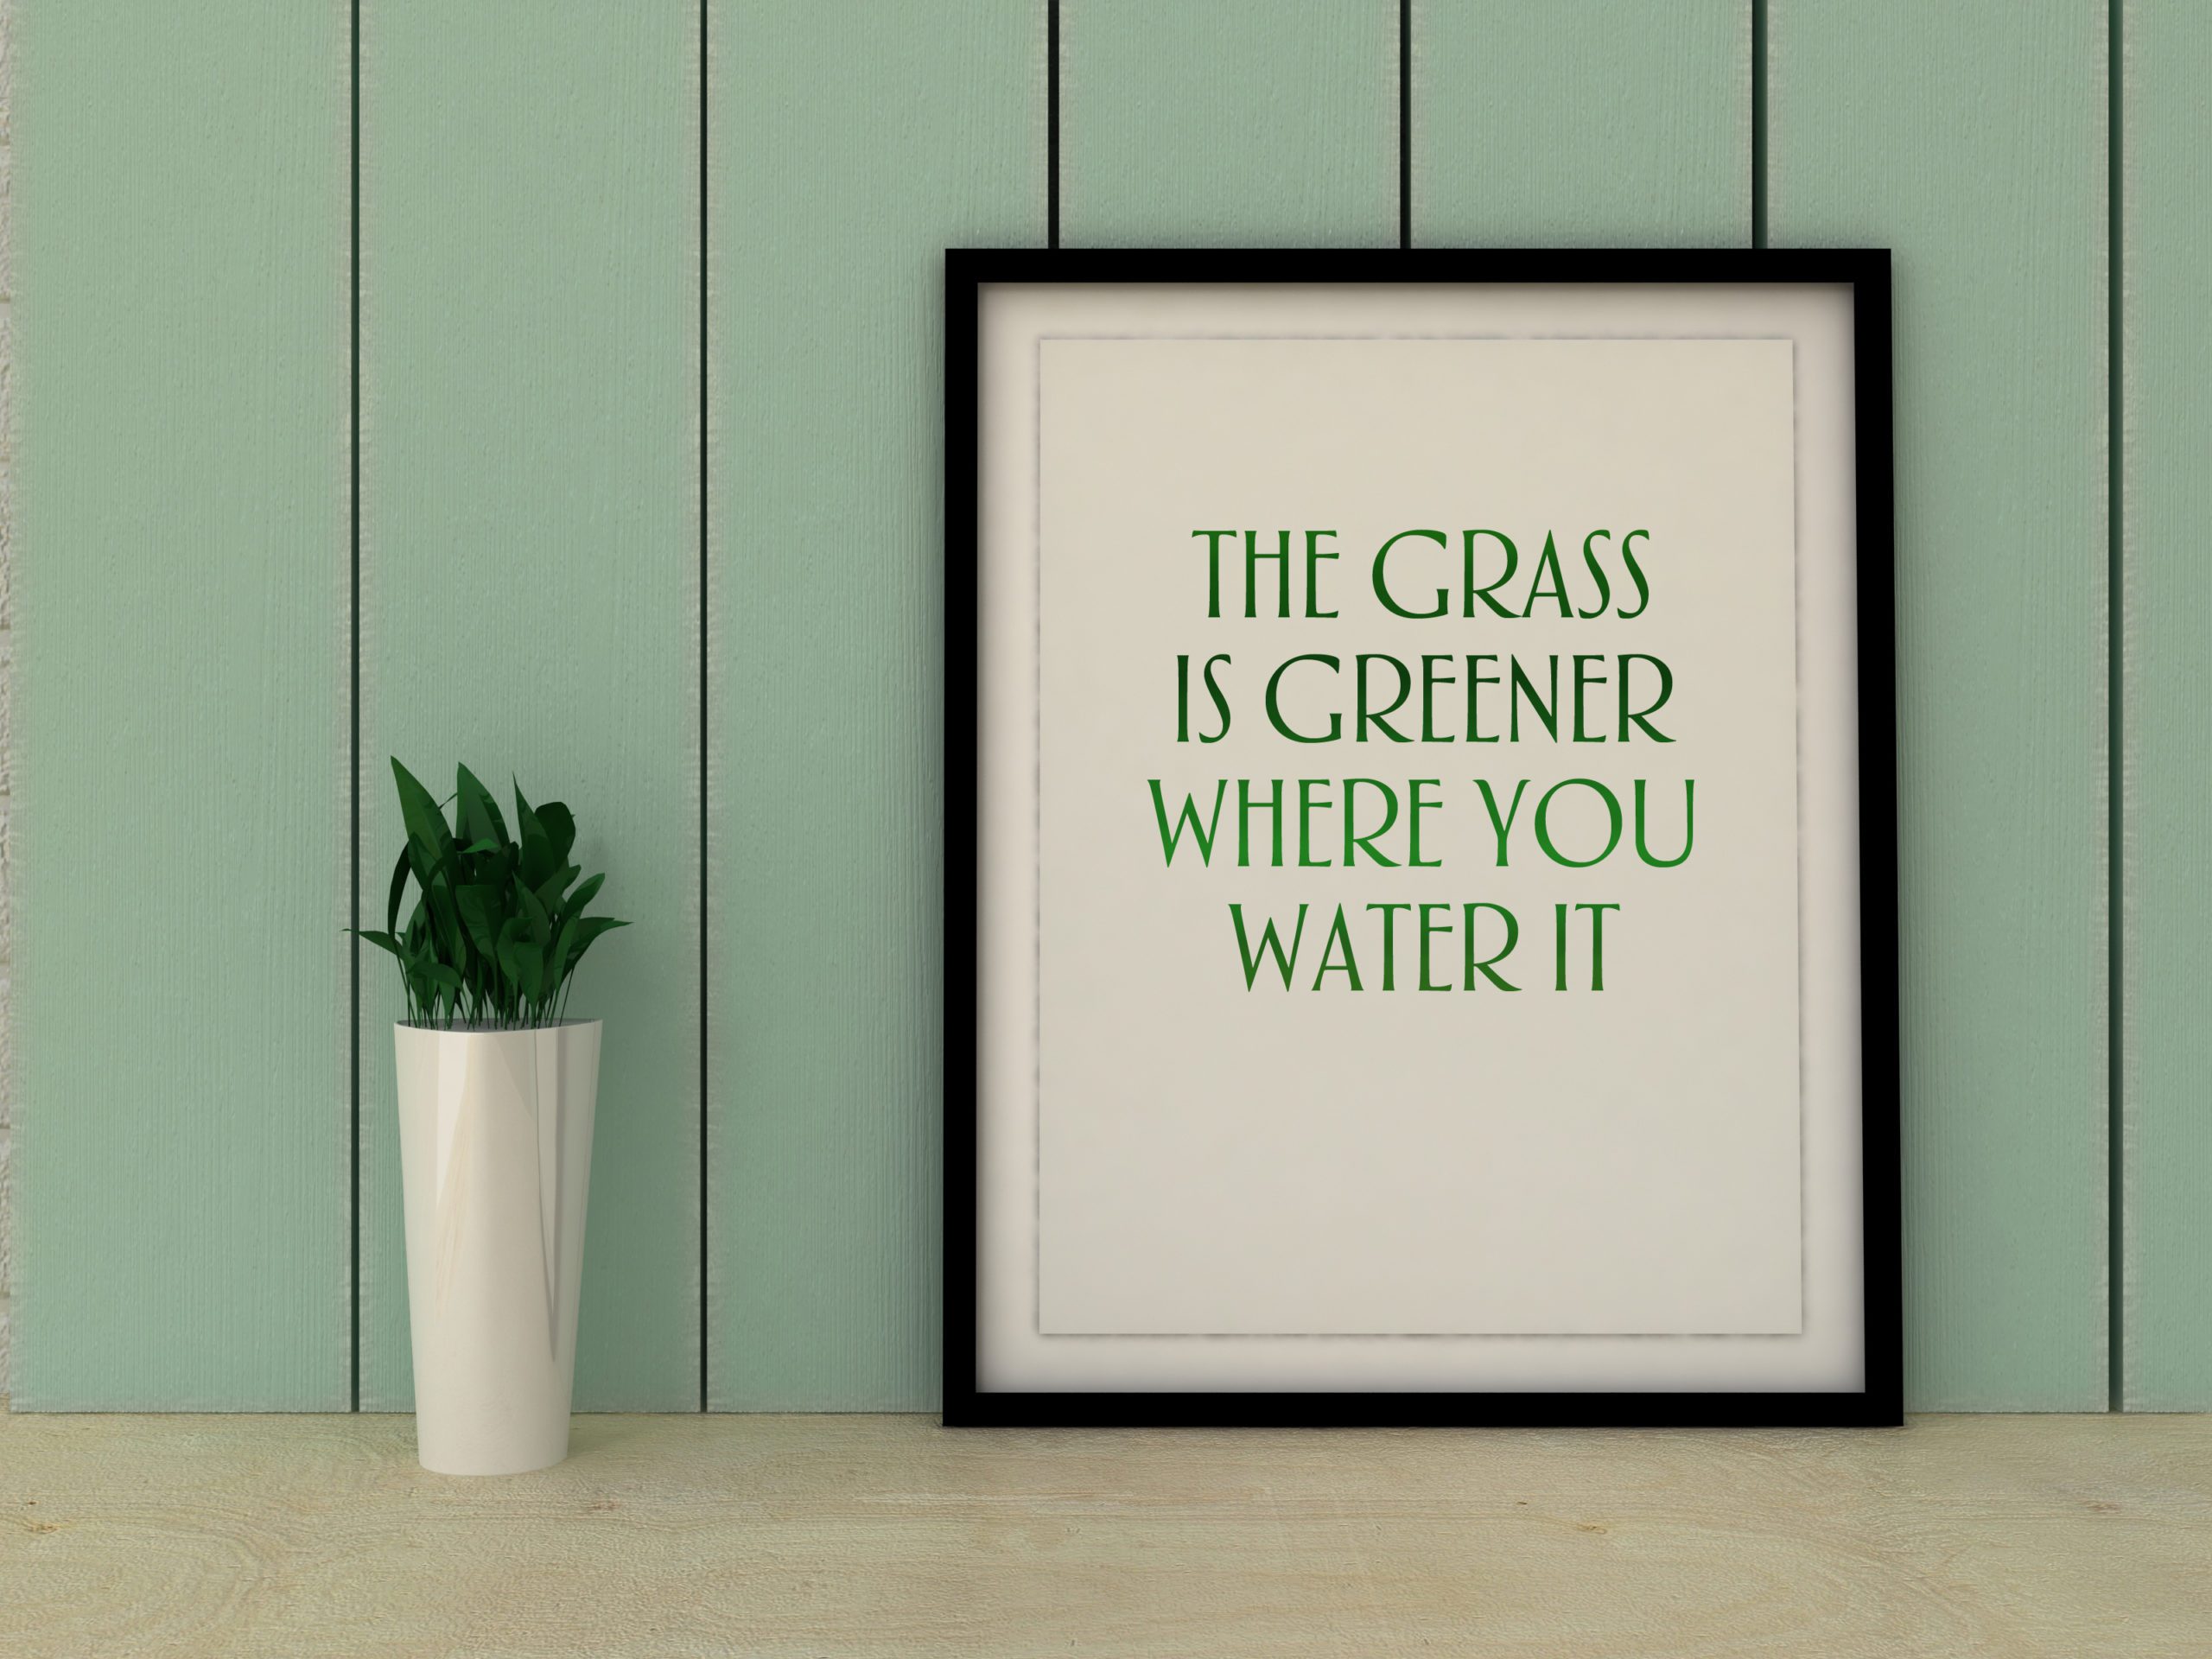 a black framed quote which says, "The Grass is Greener Where You Water It"